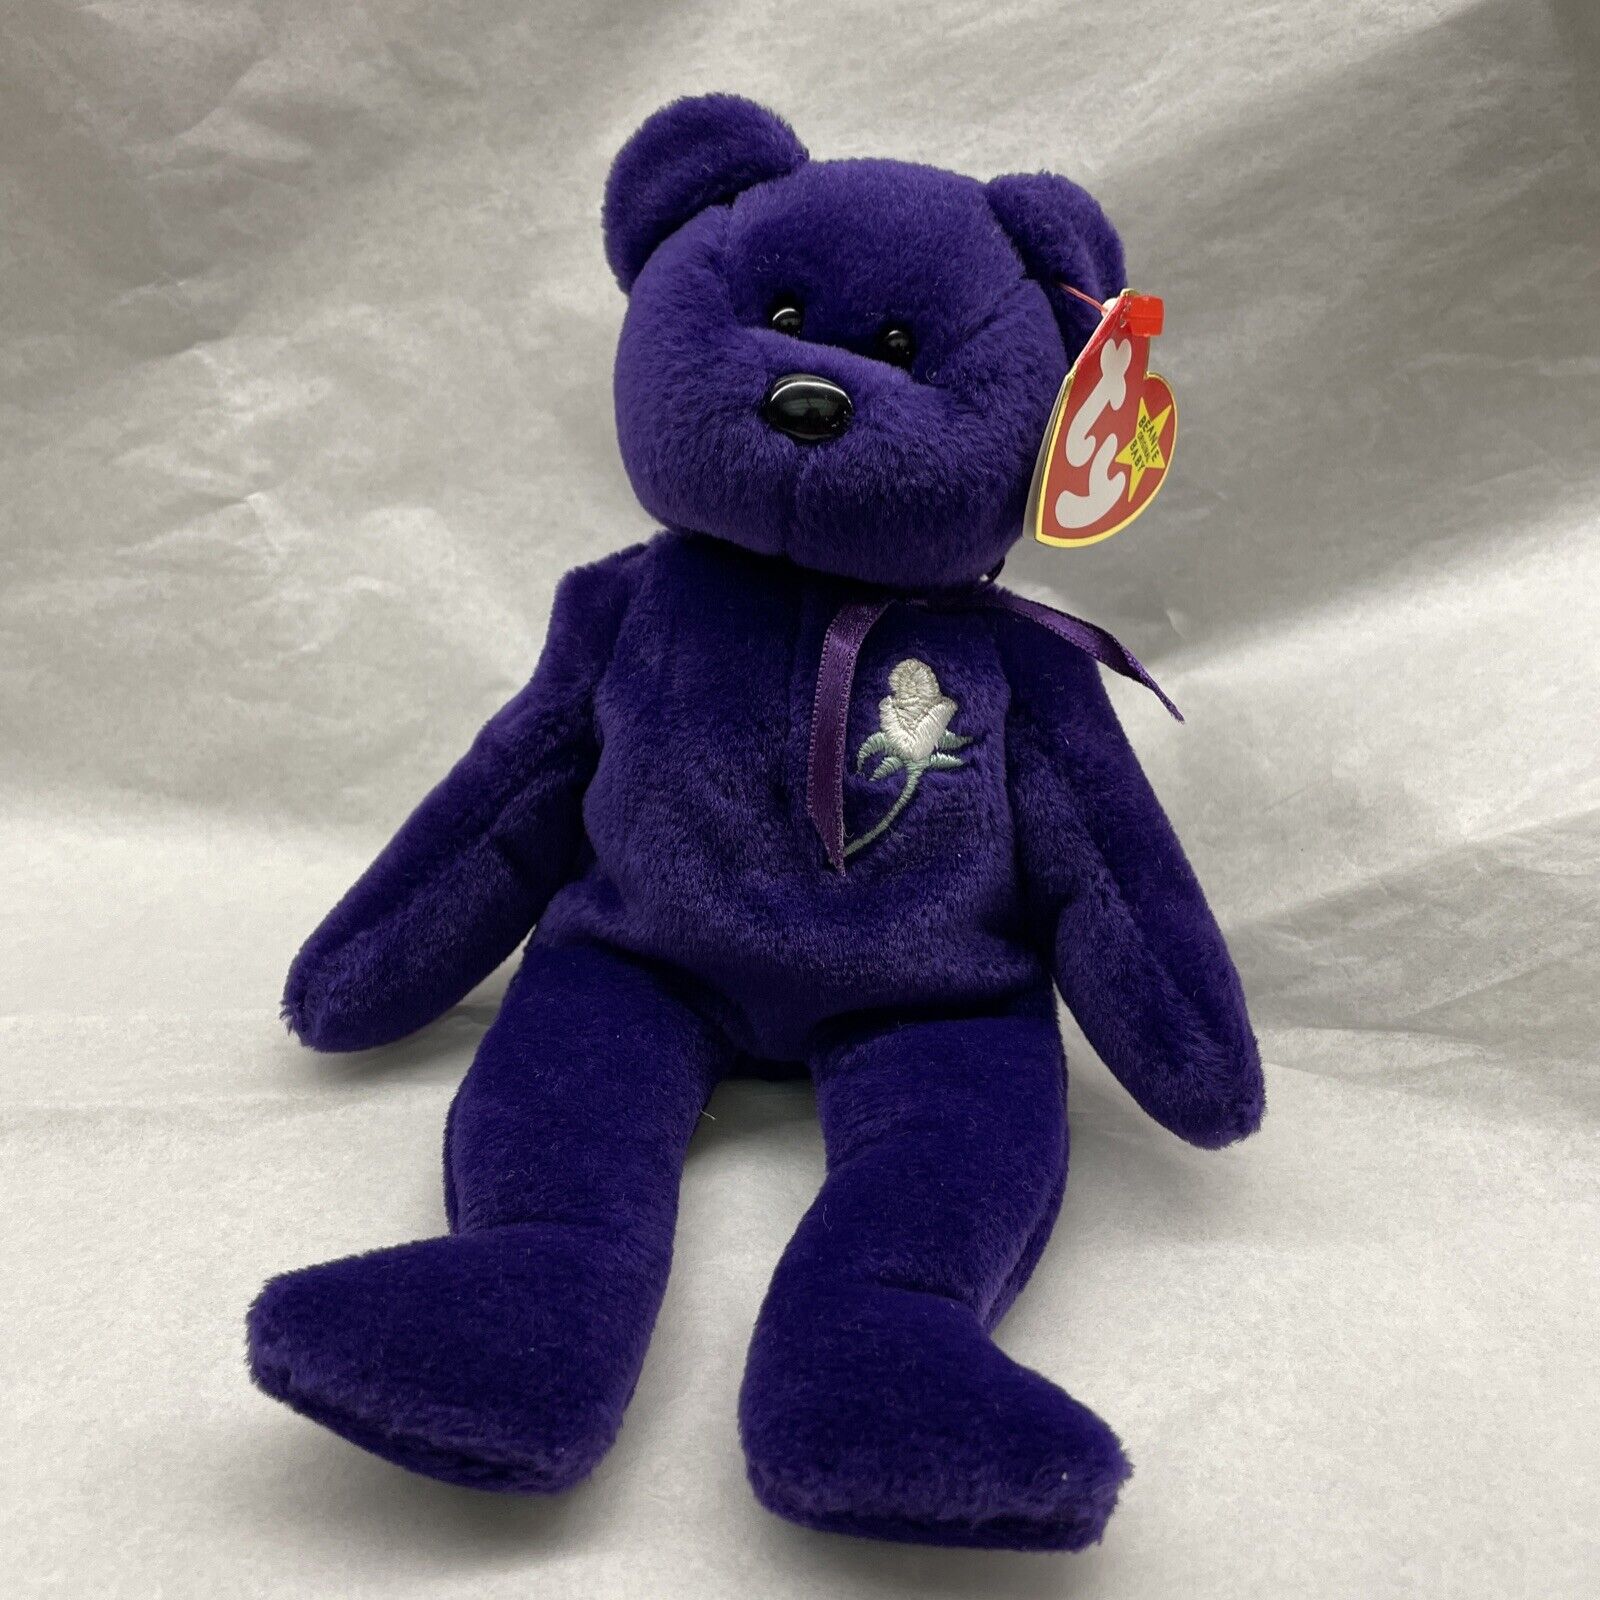 1997 Princess Diana Beanie Baby 1stEdition RARE NEAR MINT CONDITION EXCLUSIVE